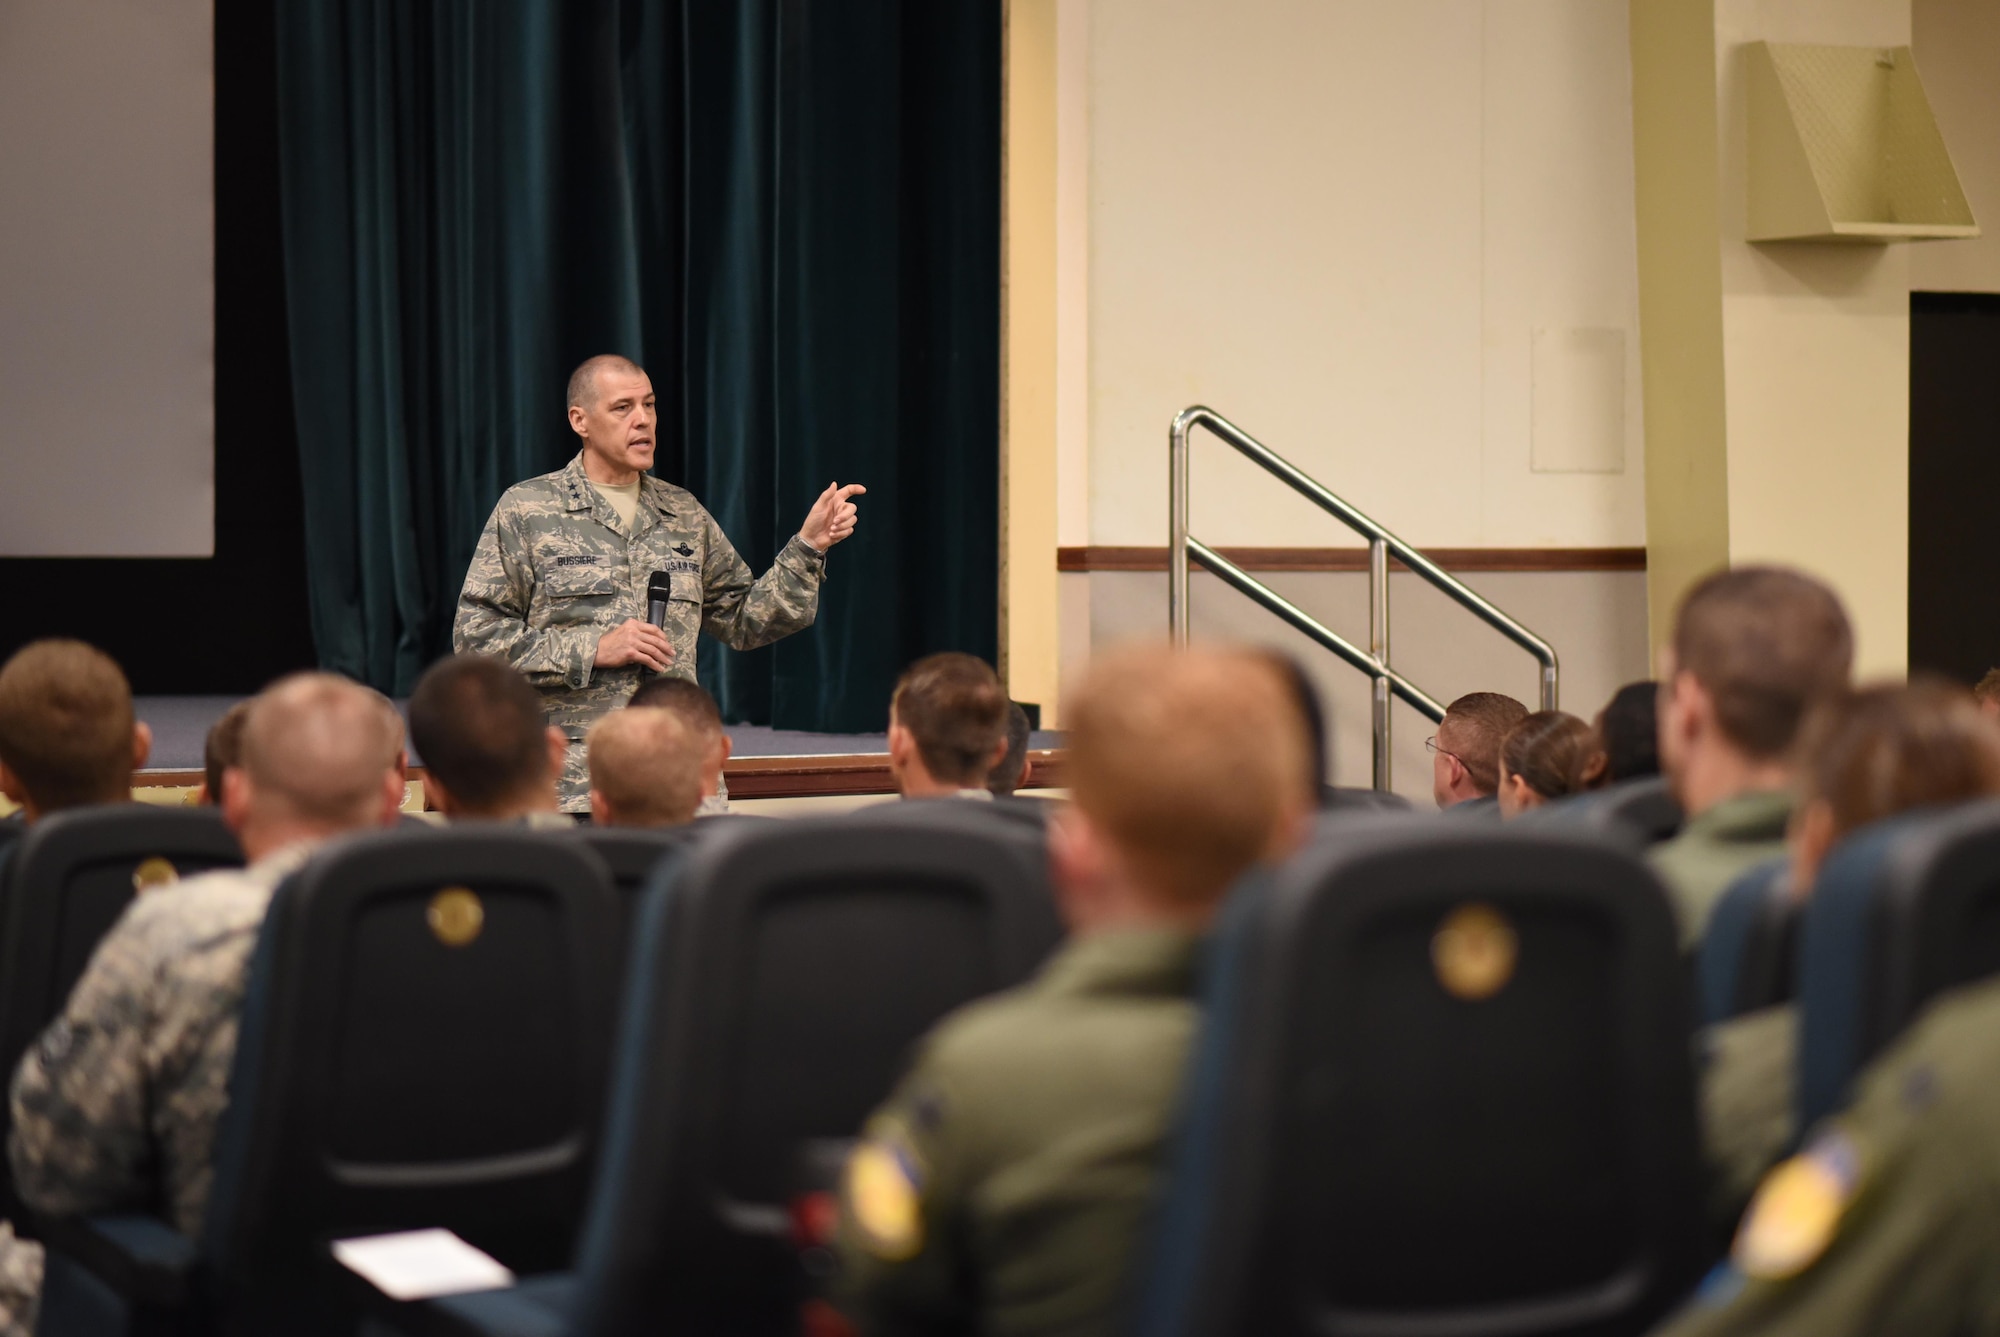 U.S. Air Force Maj. Gen. Thomas Bussiere, 8th Air Force commander, shares his command vision with the Bomber Airmen of the “Mighty Eighth” at Anderson Air Force Base Guam, Dec. 1, 2016. Bussiere’s objective is to spend time with Airmen of the Mighty Eighth, and to share his command focus on discipline, excellence and pride. (U.S. Air Force photo by Airman 1st Class Jacob Skovo)